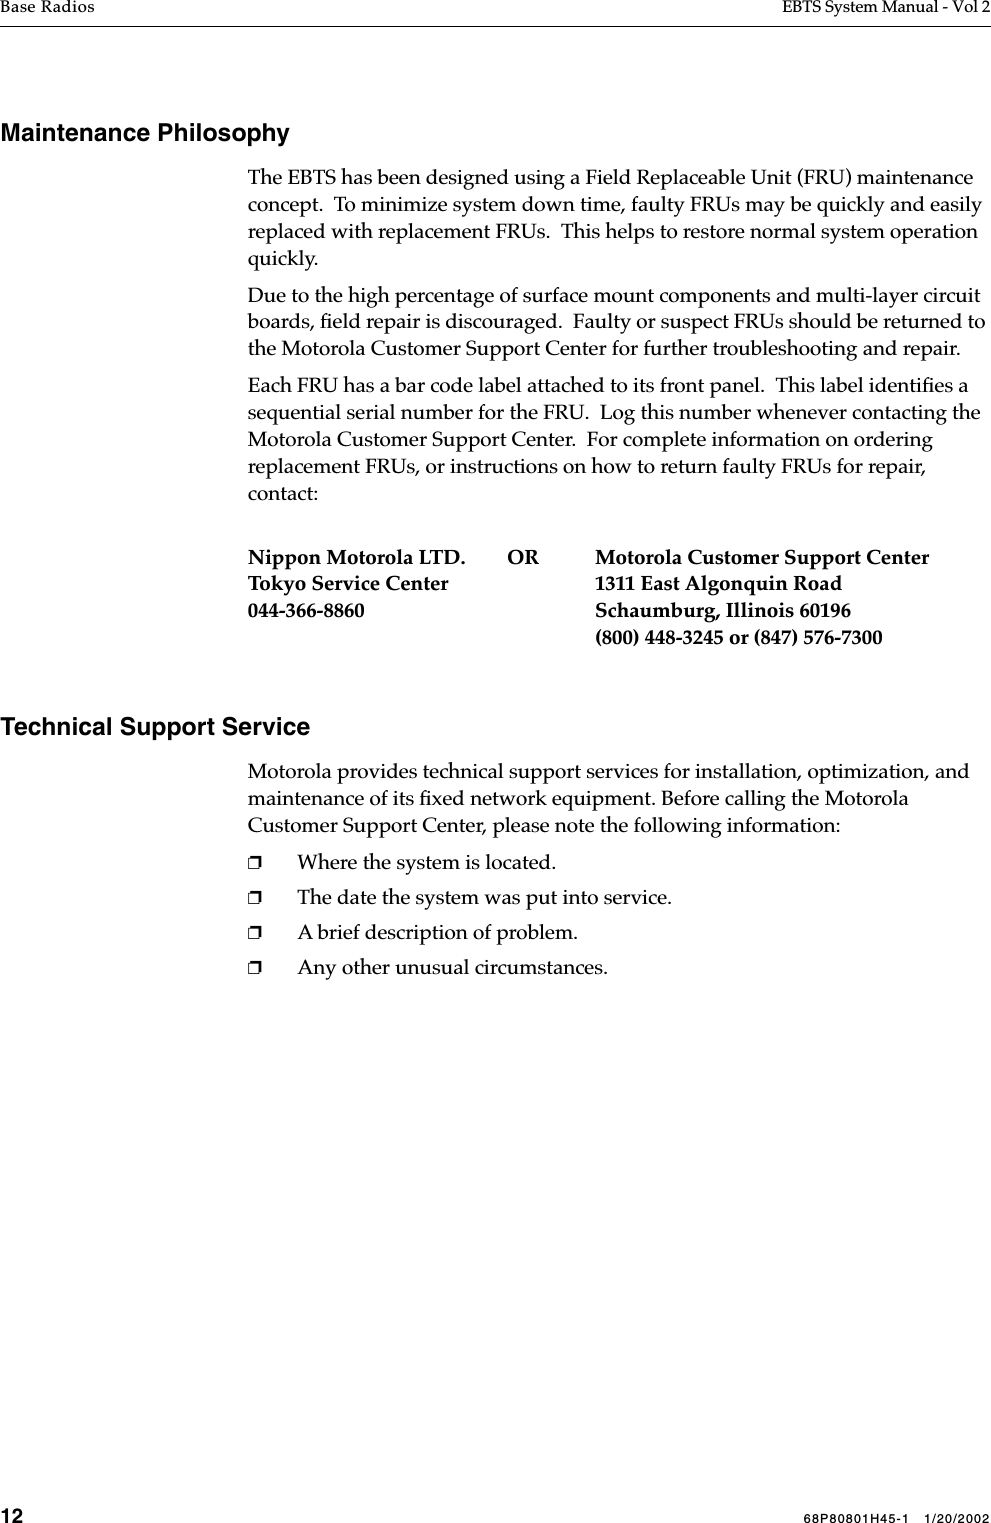 12 68P80801H45-1   1/20/2002Base Radios EBTS System Manual - Vol 2 Maintenance PhilosophyThe EBTS has been designed using a Field Replaceable Unit (FRU) maintenance concept.  To minimize system down time, faulty FRUs may be quickly and easily replaced with replacement FRUs.  This helps to restore normal system operation quickly.Due to the high percentage of surface mount components and multi-layer circuit boards, ﬁeld repair is discouraged.  Faulty or suspect FRUs should be returned to the Motorola Customer Support Center for further troubleshooting and repair.Each FRU has a bar code label attached to its front panel.  This label identiﬁes a sequential serial number for the FRU.  Log this number whenever contacting the Motorola Customer Support Center.  For complete information on ordering replacement FRUs, or instructions on how to return faulty FRUs for repair, contact:Nippon Motorola LTD.        OR Motorola Customer Support CenterTokyo Service Center 1311 East Algonquin Road044-366-8860 Schaumburg, Illinois 60196(800) 448-3245 or (847) 576-7300Technical Support ServiceMotorola provides technical support services for installation, optimization, and maintenance of its ﬁxed network equipment. Before calling the Motorola Customer Support Center, please note the following information:❐Where the system is located.❐The date the system was put into service.❐A brief description of problem. ❐Any other unusual circumstances.